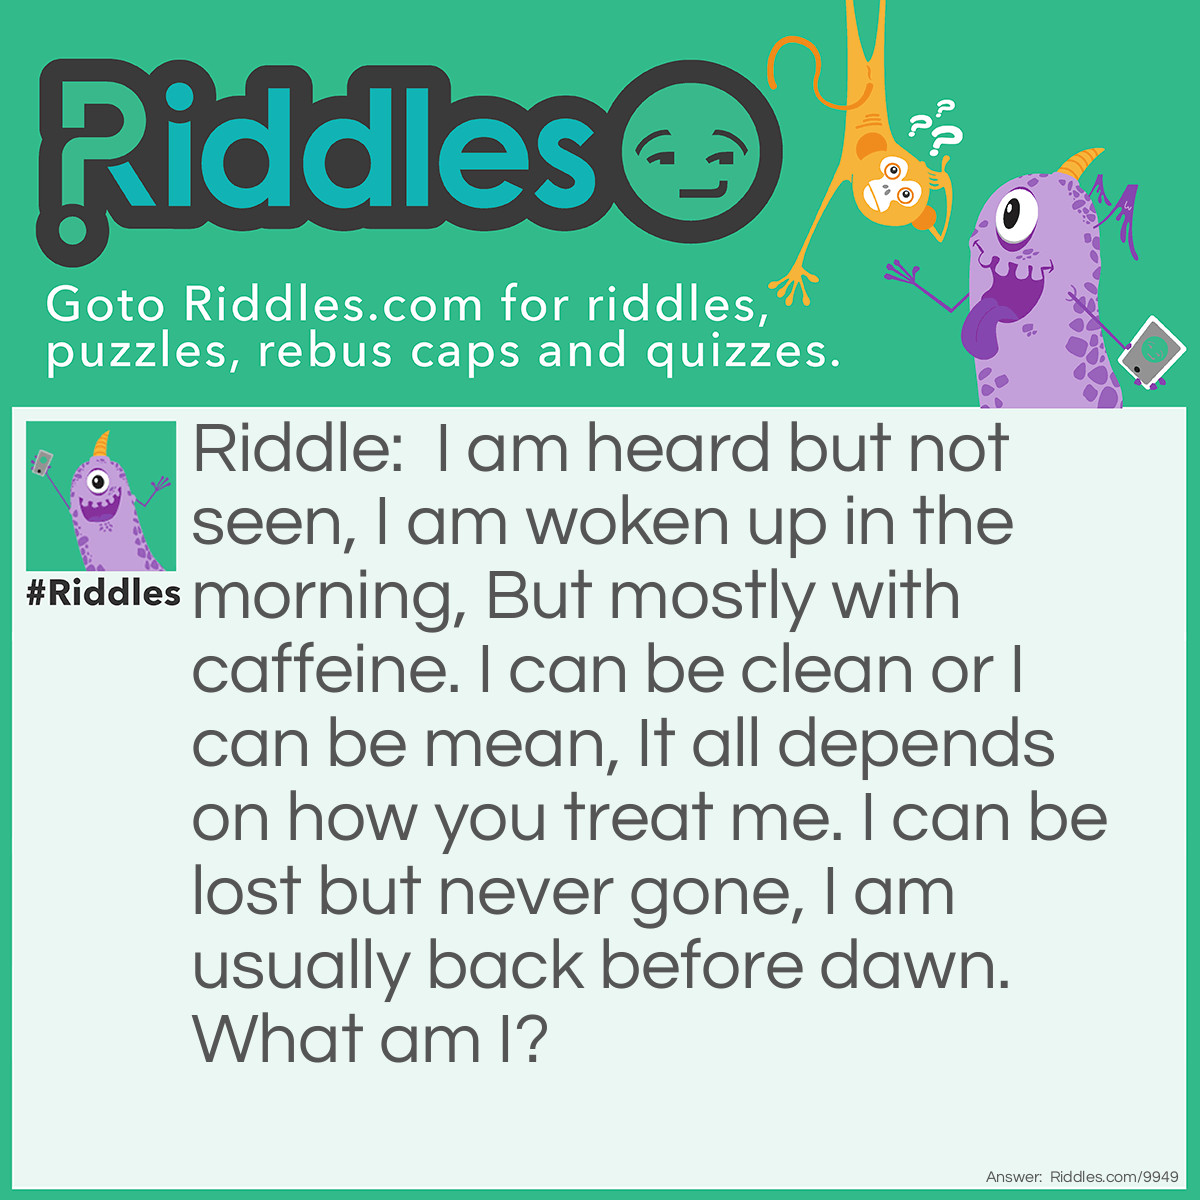 Riddle: I am heard but not seen, I am woken up in the morning, But mostly with caffeine. I can be clean or I can be mean, It all depends on how you treat me. I can be lost but never gone, I am usually back before dawn. What am I? Answer: Your voice.